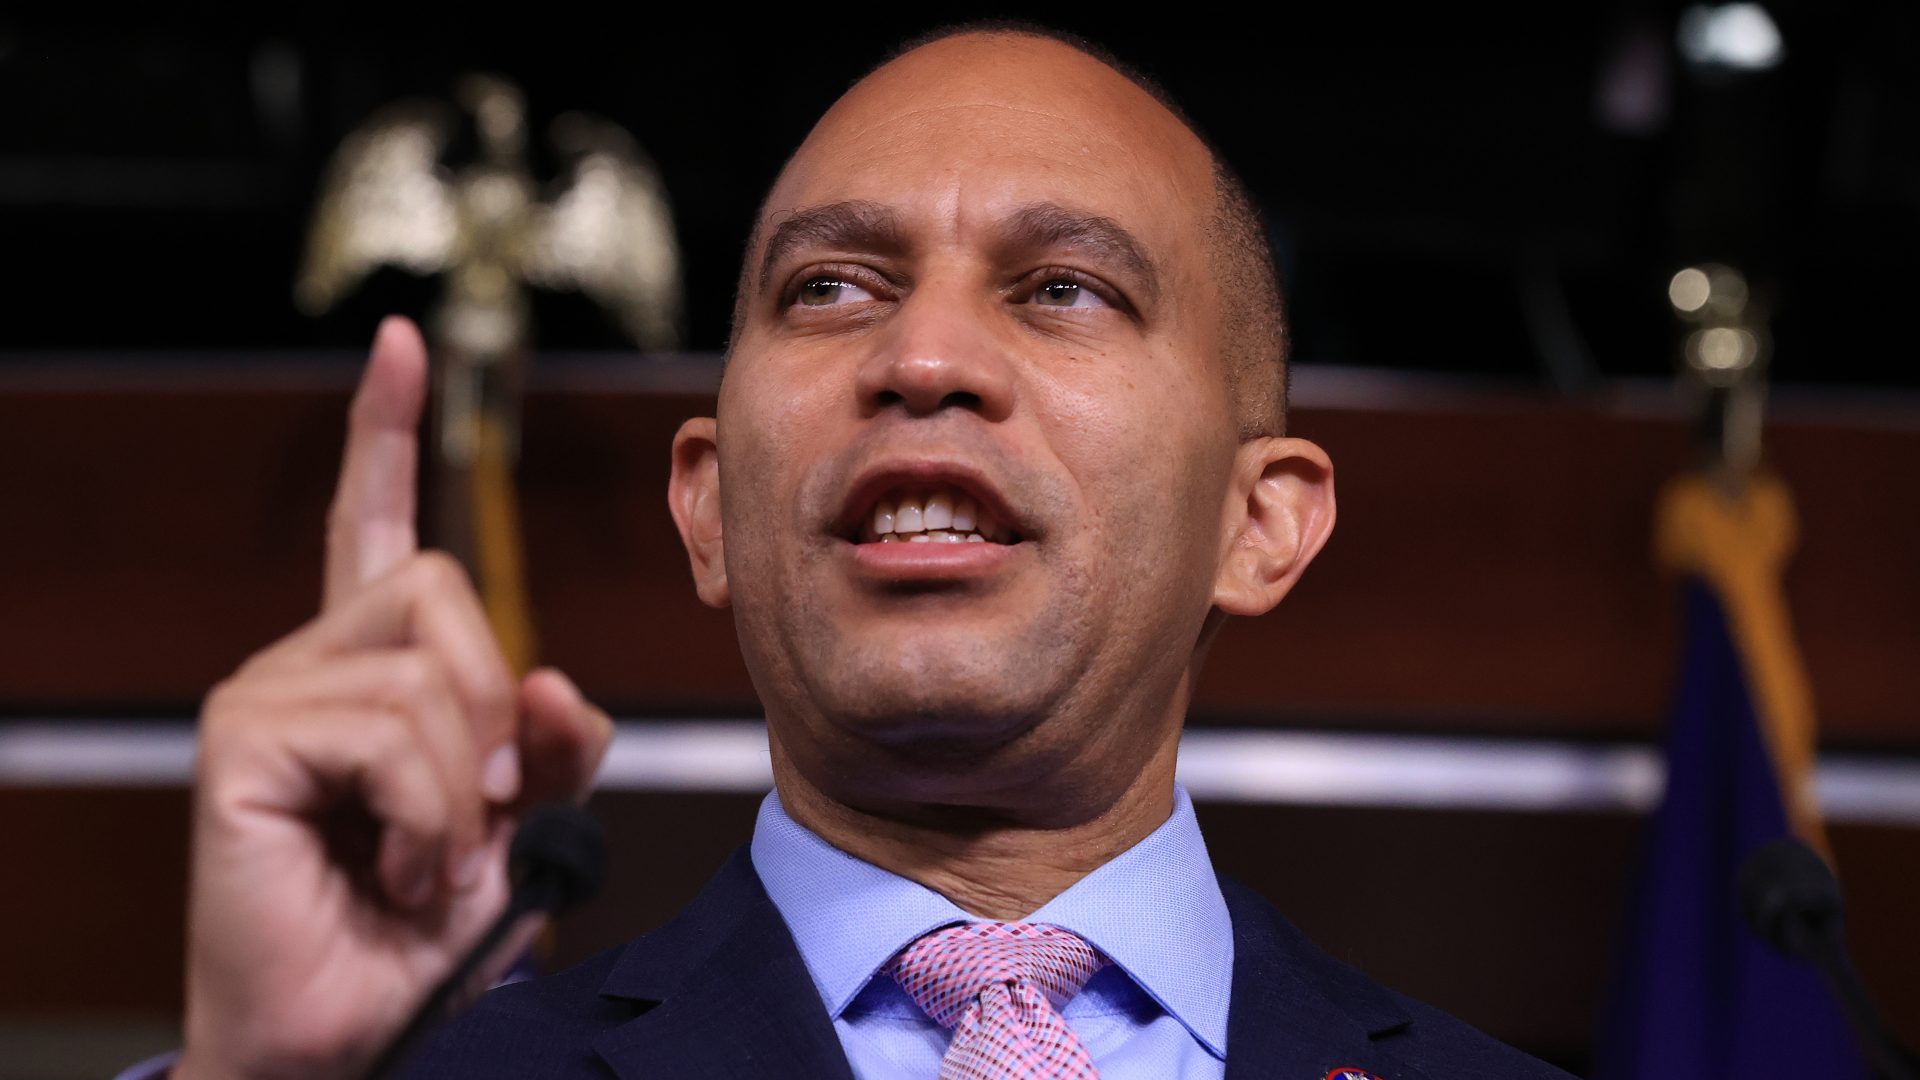 Hakeem Jeffries, the Democrat who is new minority leader in the US House of Representatives. Photo: Chip Somodevilla/Getty